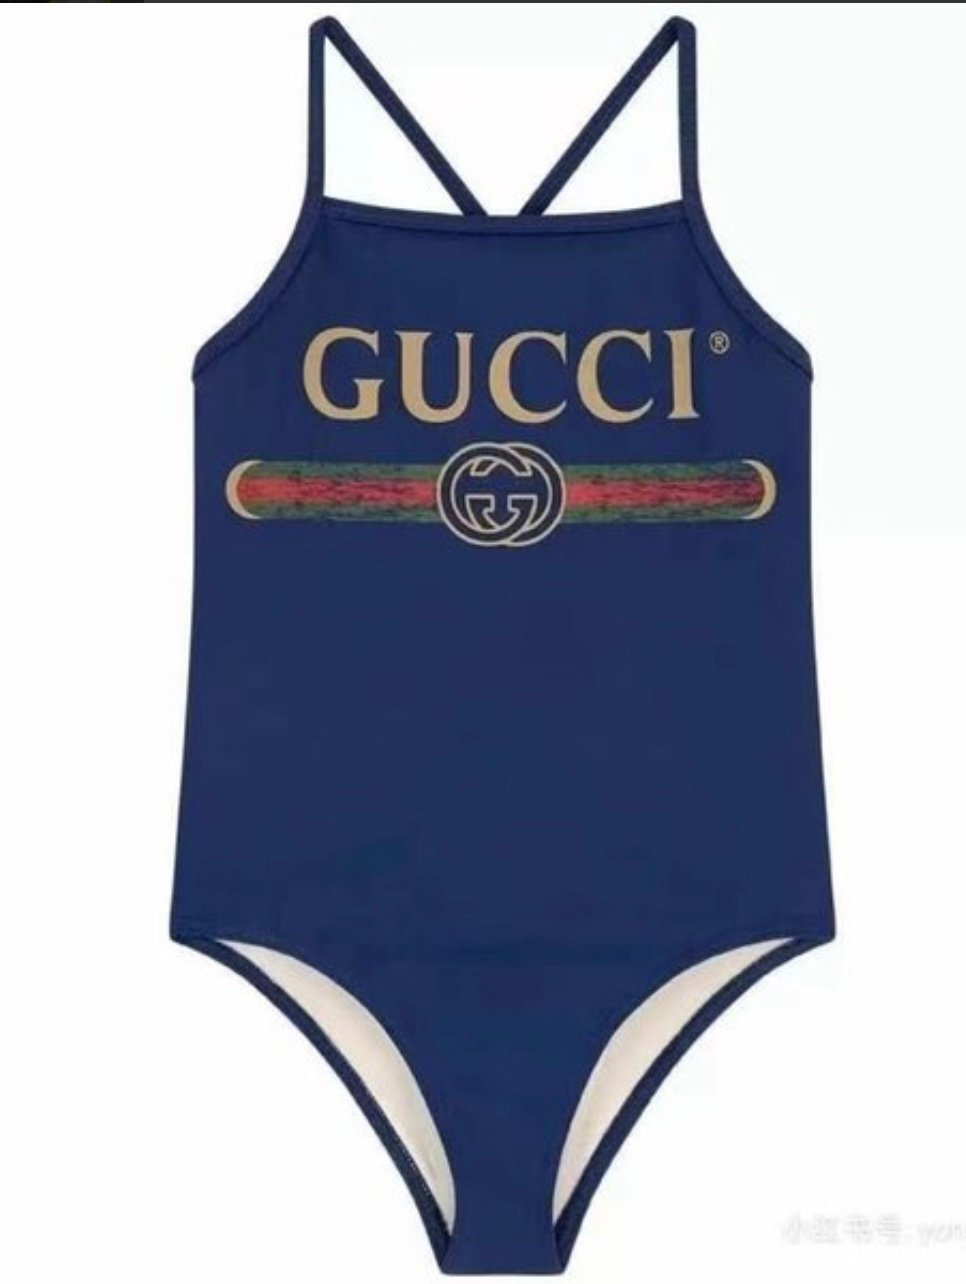 Gucci bathing suit | ShopBambinaBoutique